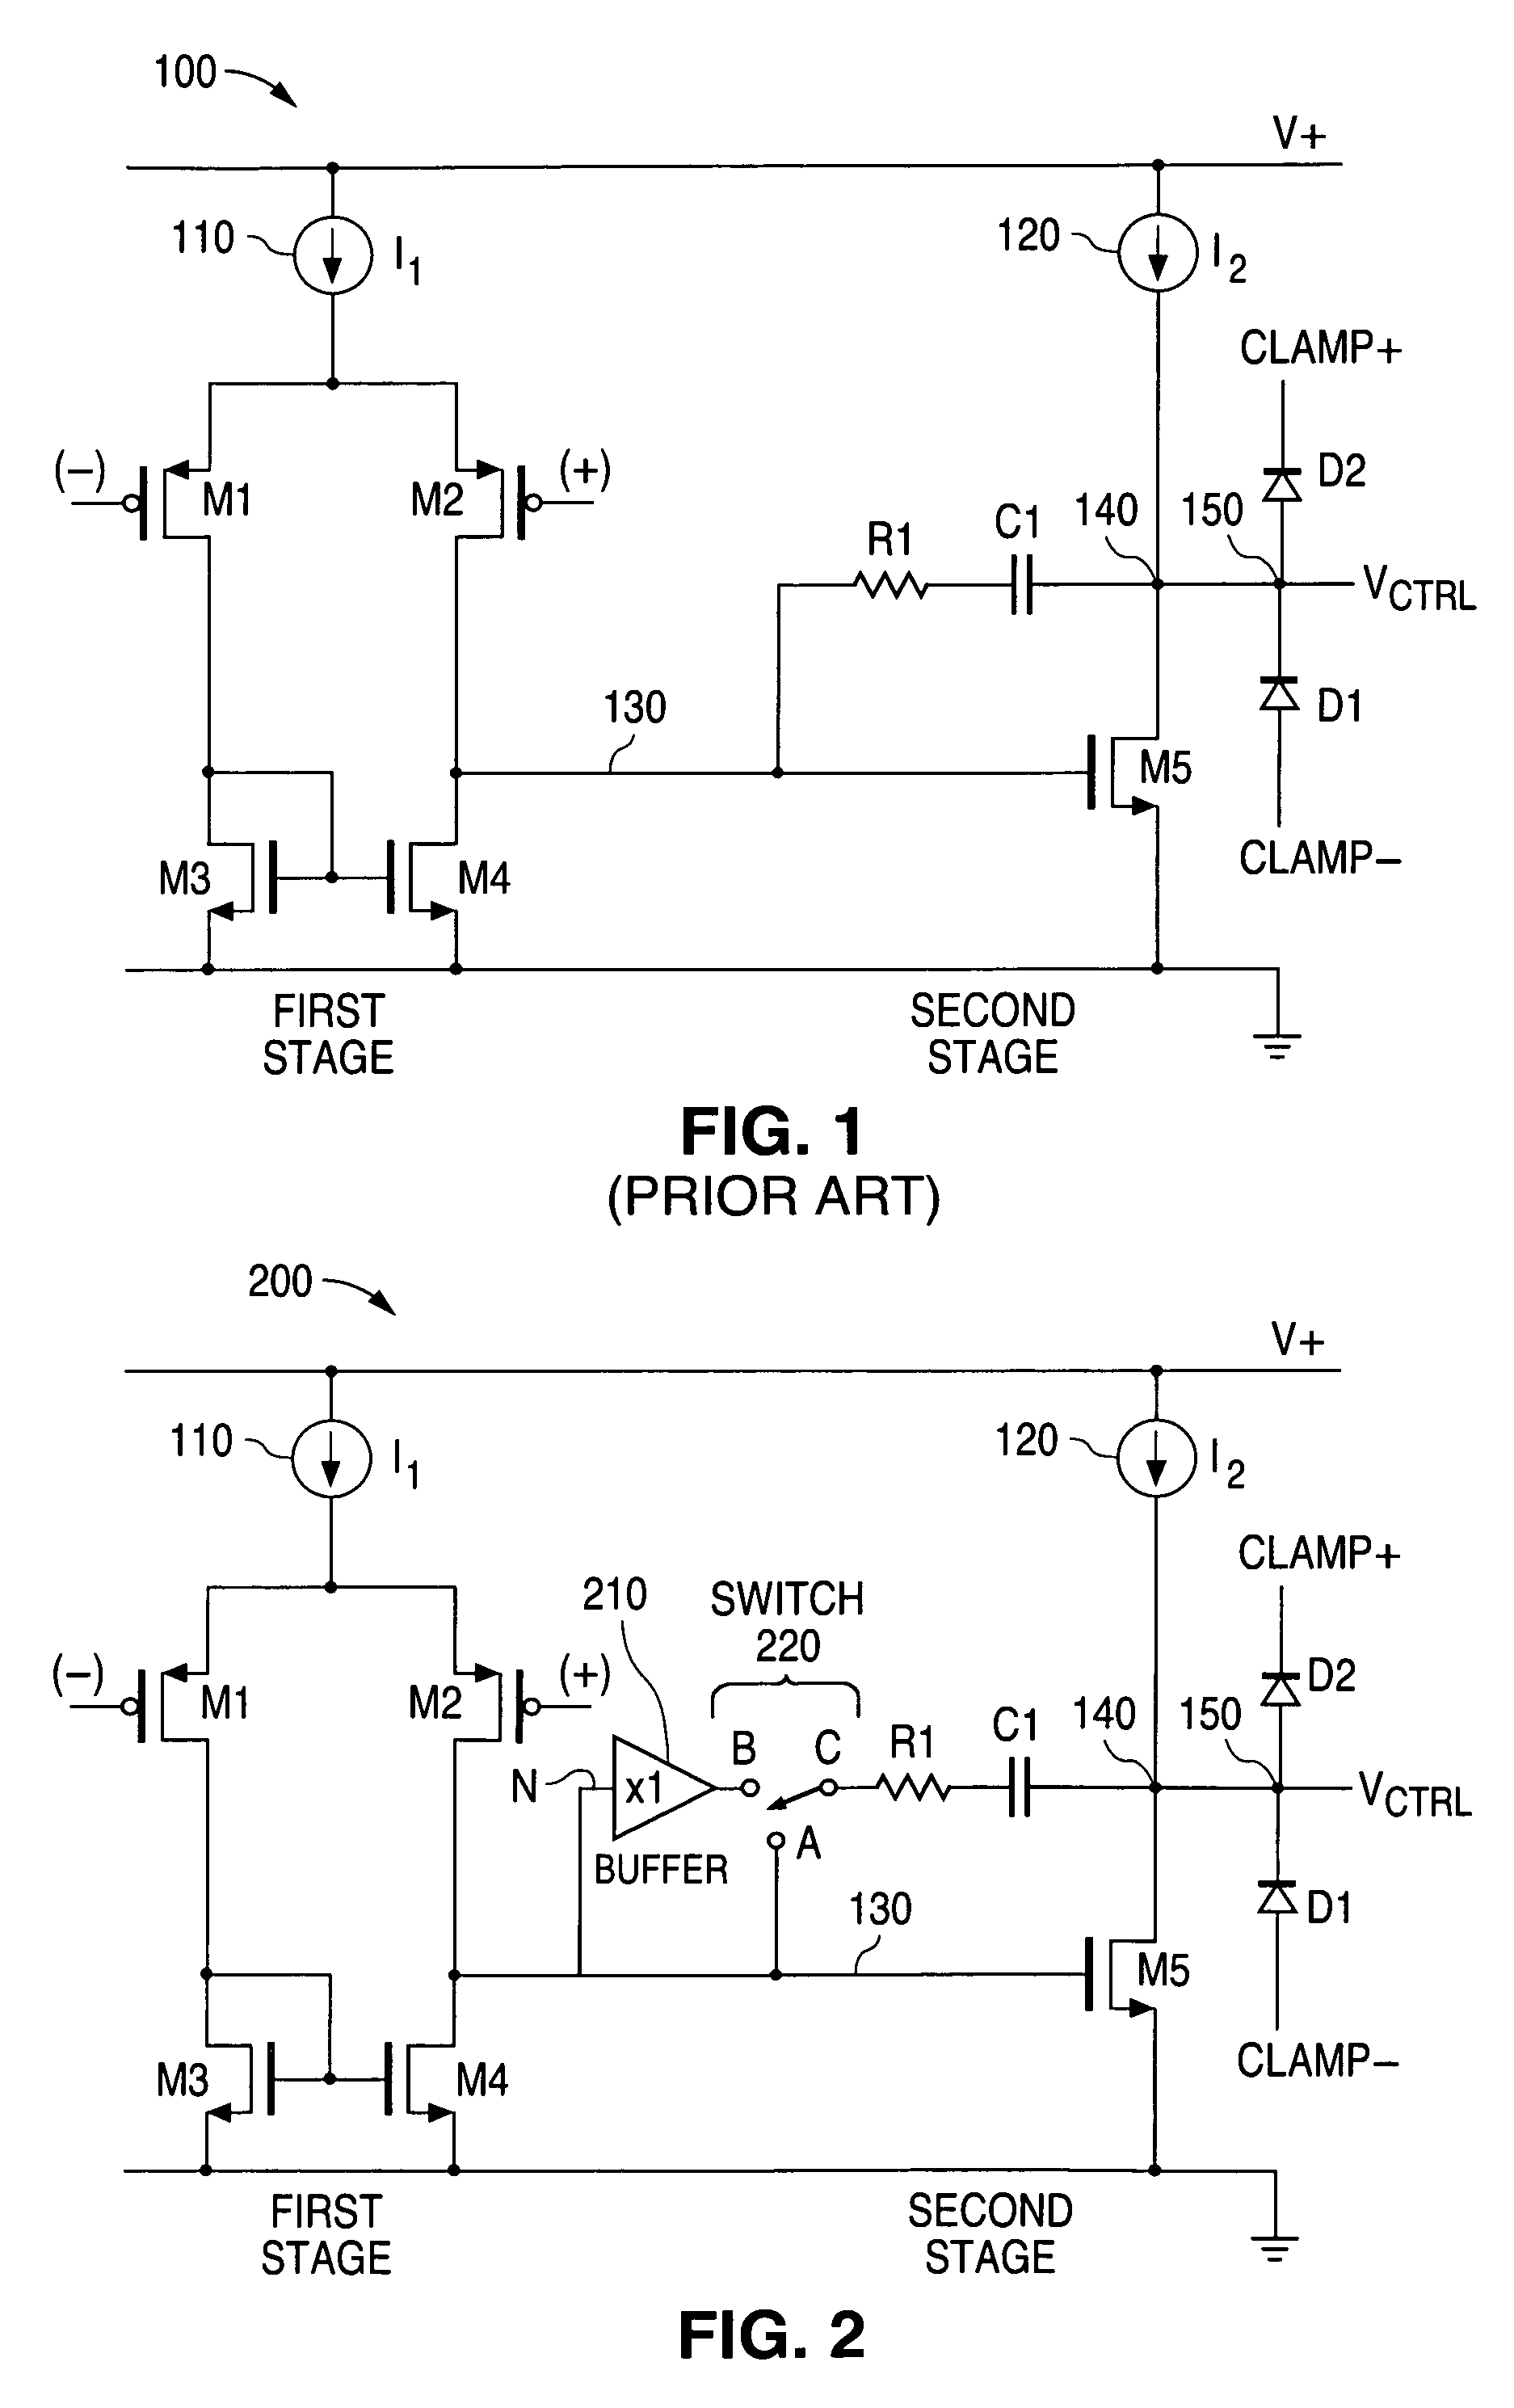 System and method for controlling an error amplifier between control mode changes